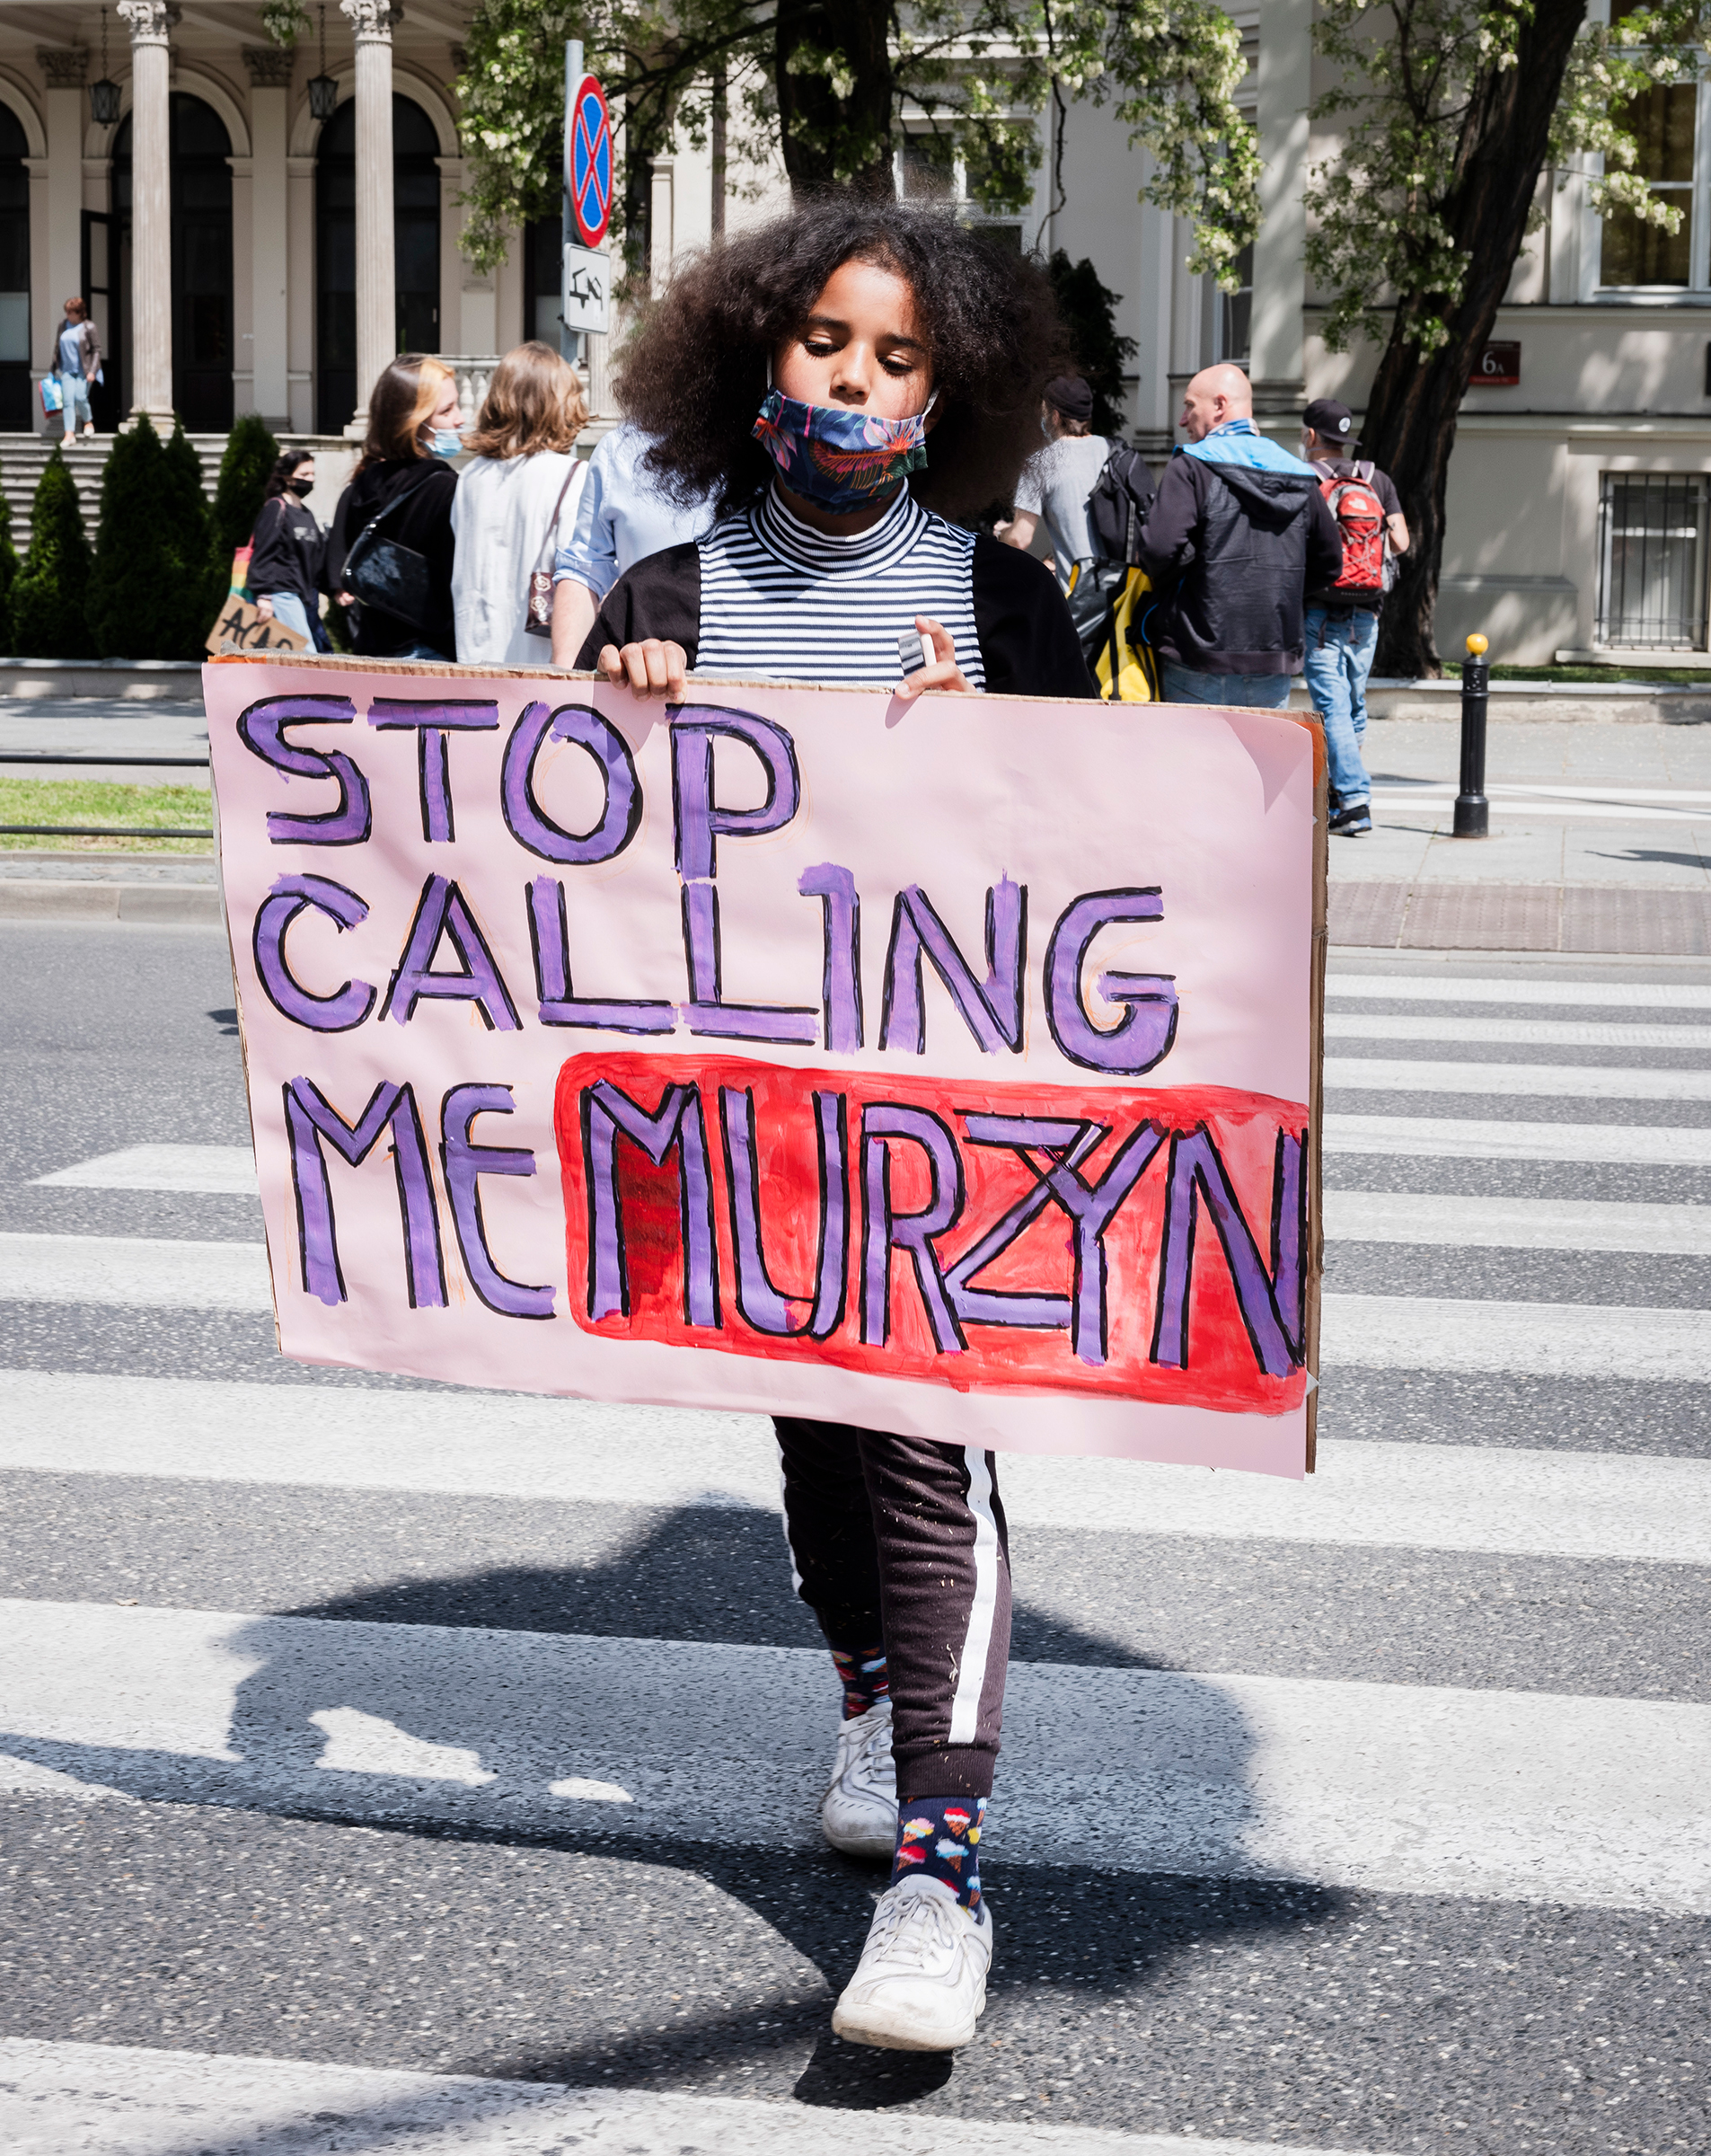 Bianka Nwolisa walks with a sign "Stop Calling Me Murzyn," during a protest against police brutality in the wake of George Floyd's killing, in Warsaw on June 4, 2020. (Rafal Milach—Magnum Photos)